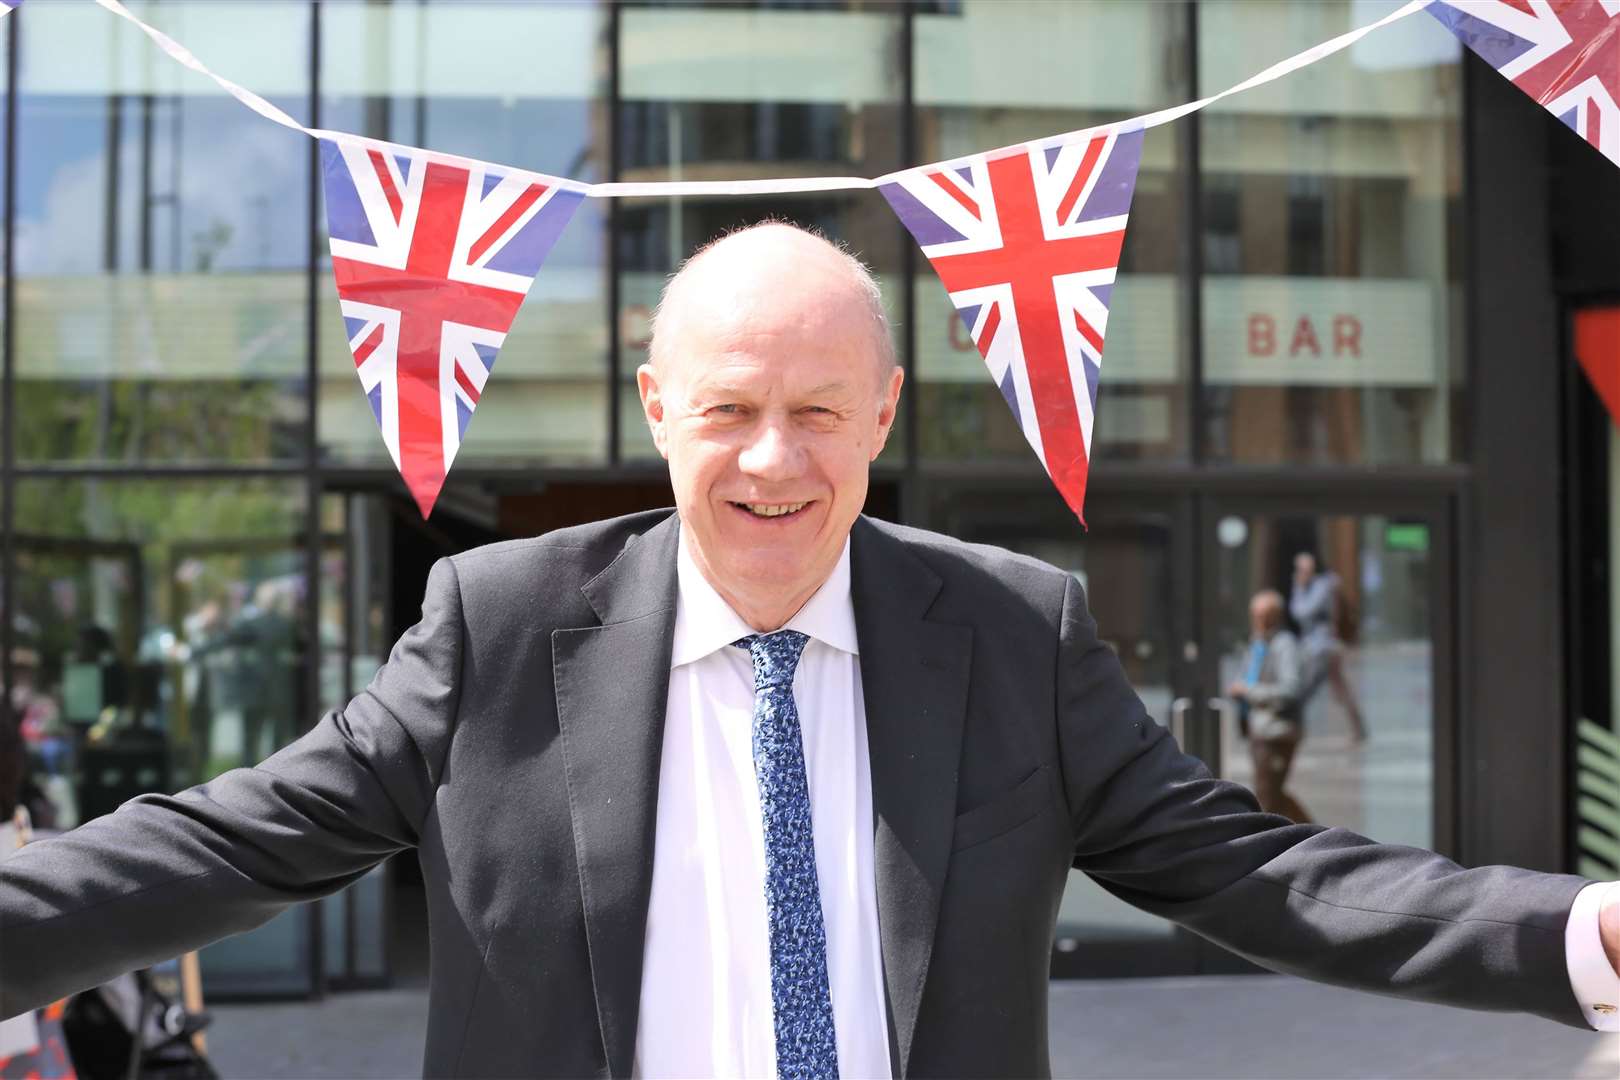 Ashford MP Damian Green appeared on the Kent Politics Podcast